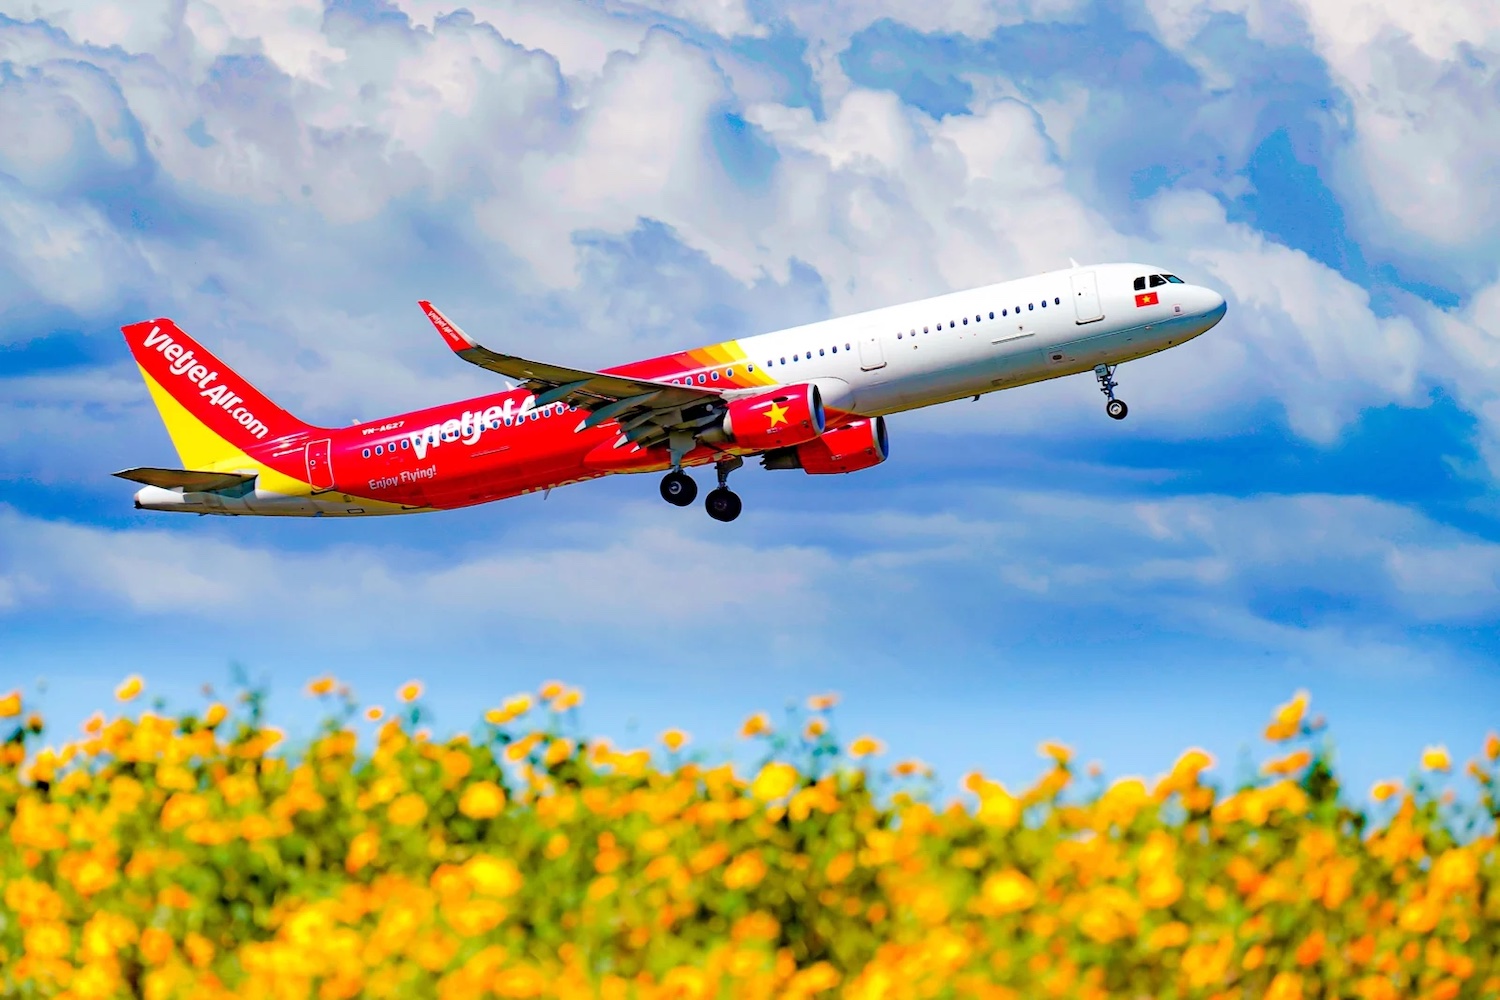 One of the leading airlines in Vietnam - VietJet Air